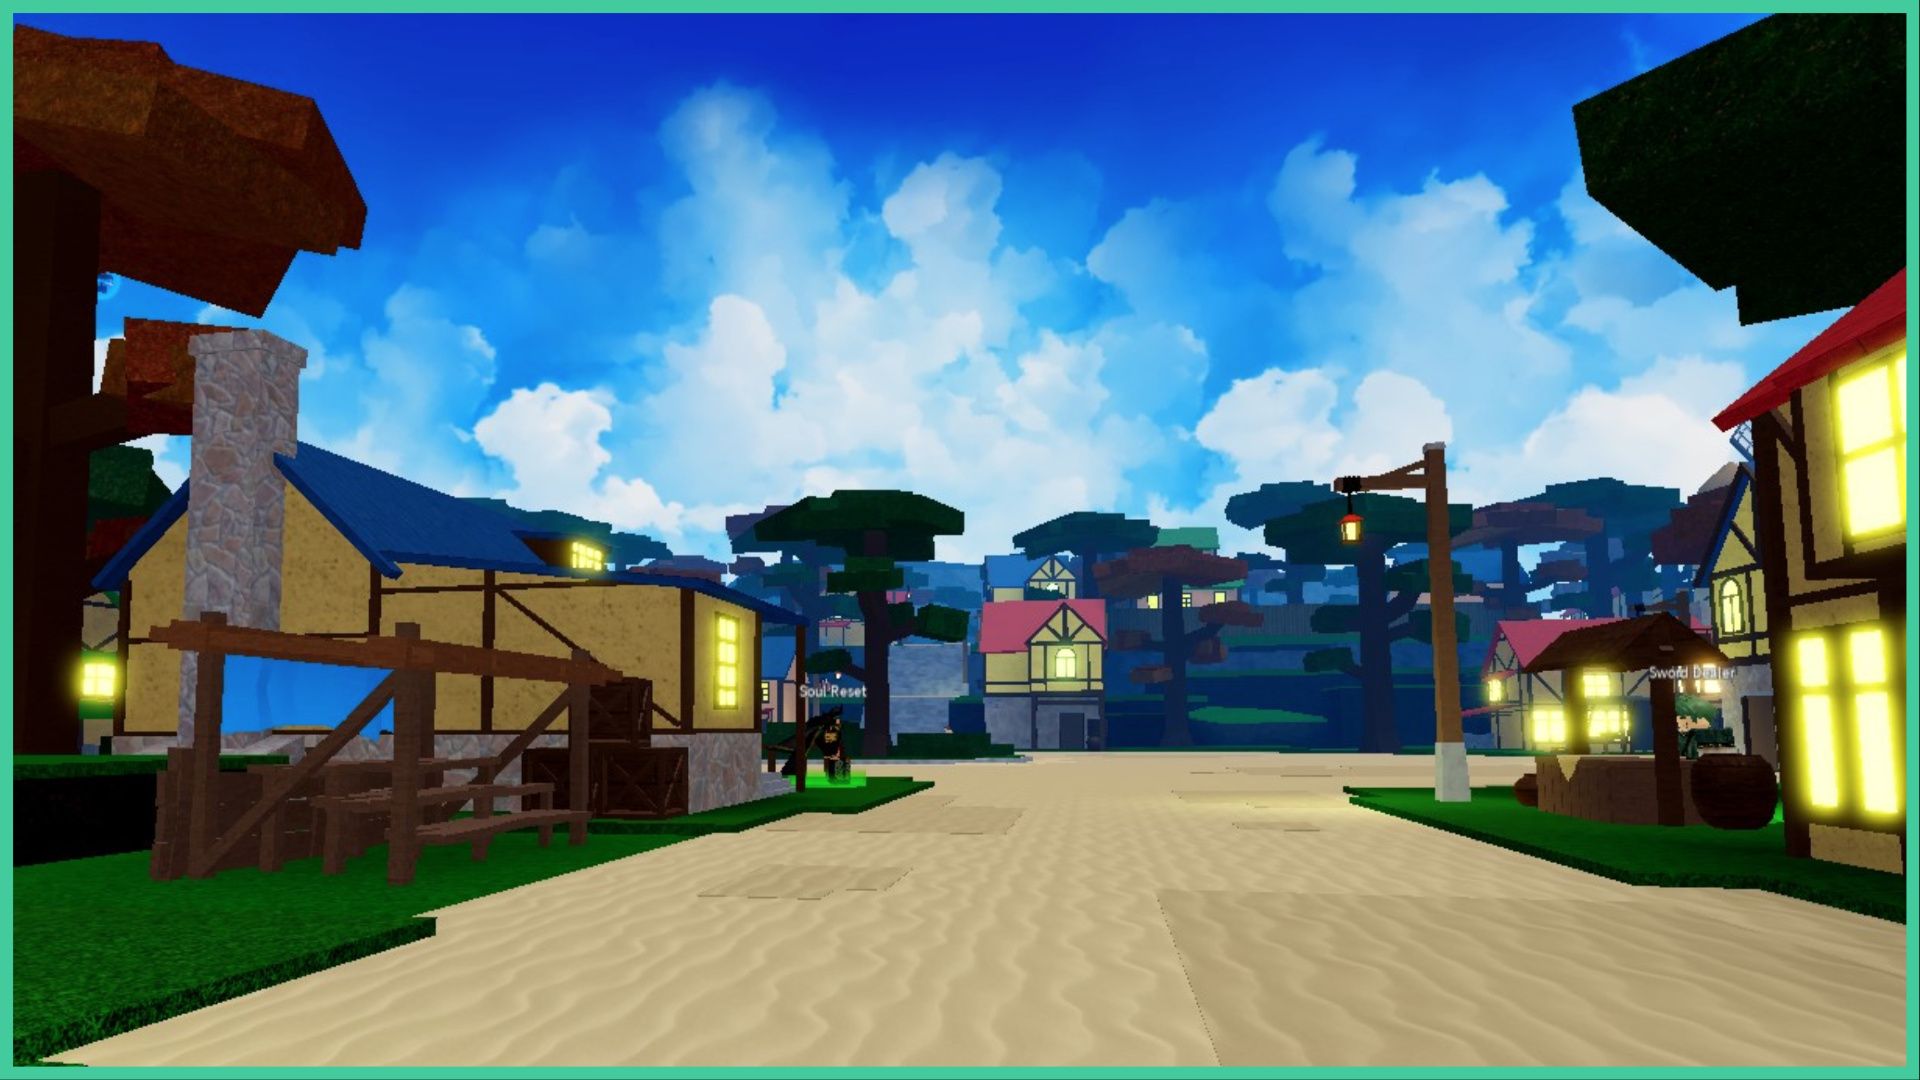 feature image for our anime spirits codes, the image features a screenshot from the game of the spawn area which is a pirate town with buildings supported by wooden beams, street lamps, tall trees, a well, and residents as they stand on grass or a sandy path